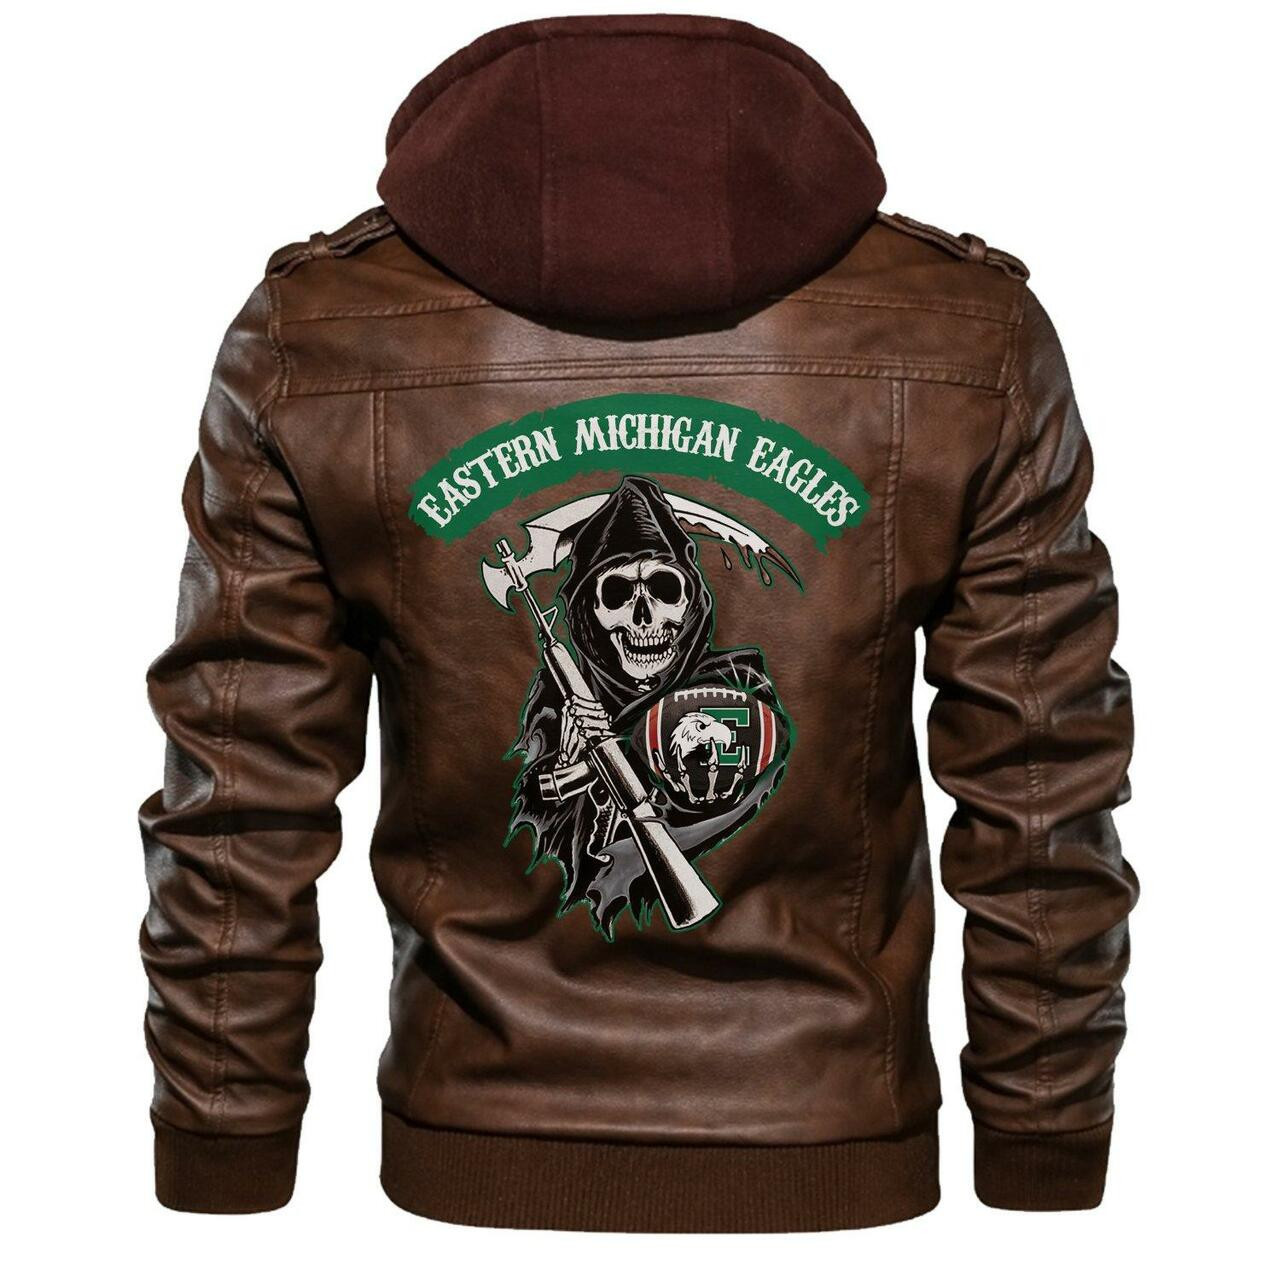 If you're looking for a new leather jacket this season - keep reading! 81